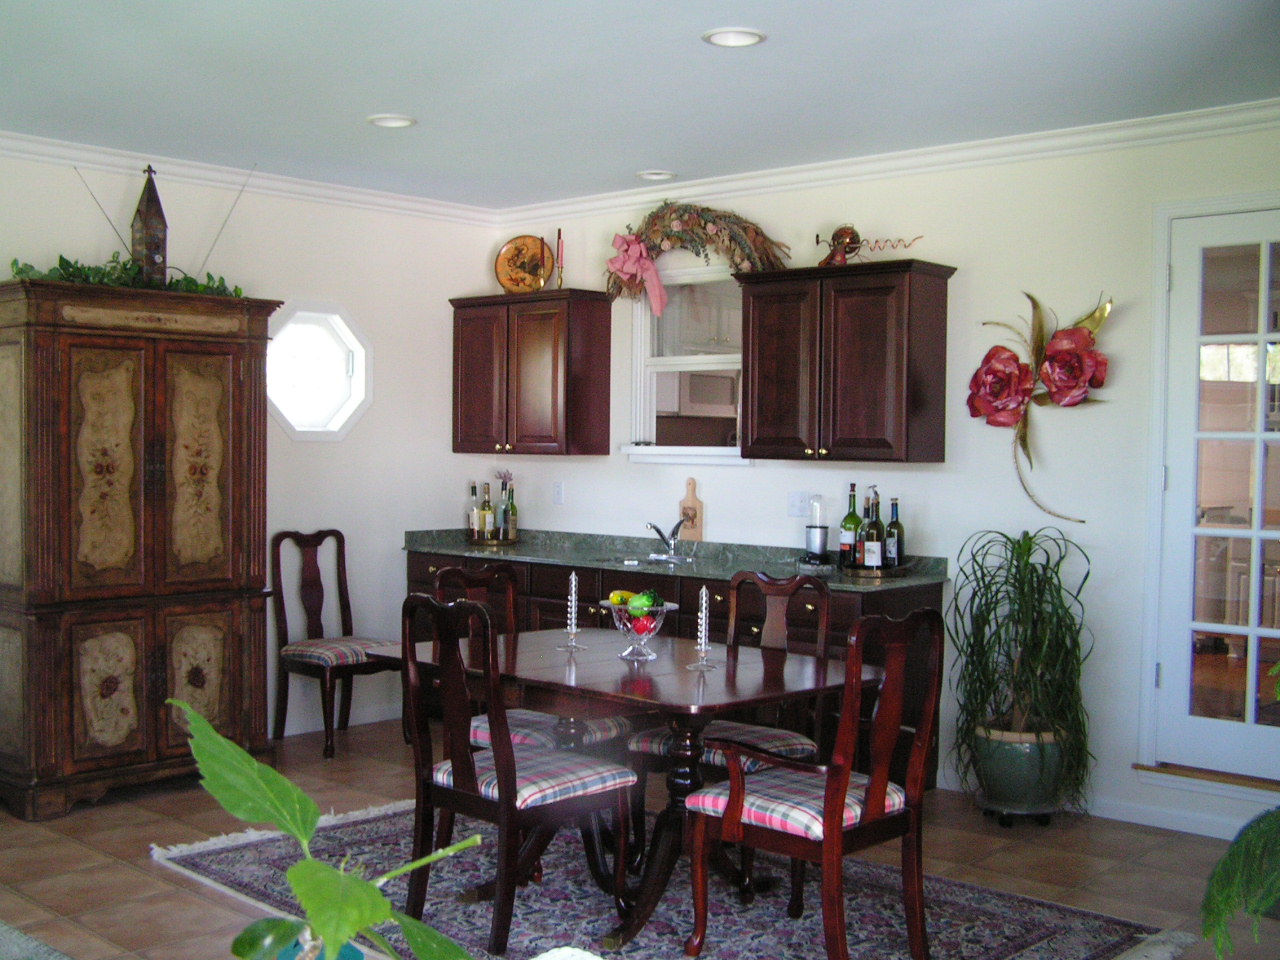 An extra window lights the beautiful formal dining area. Notice the crown molding.